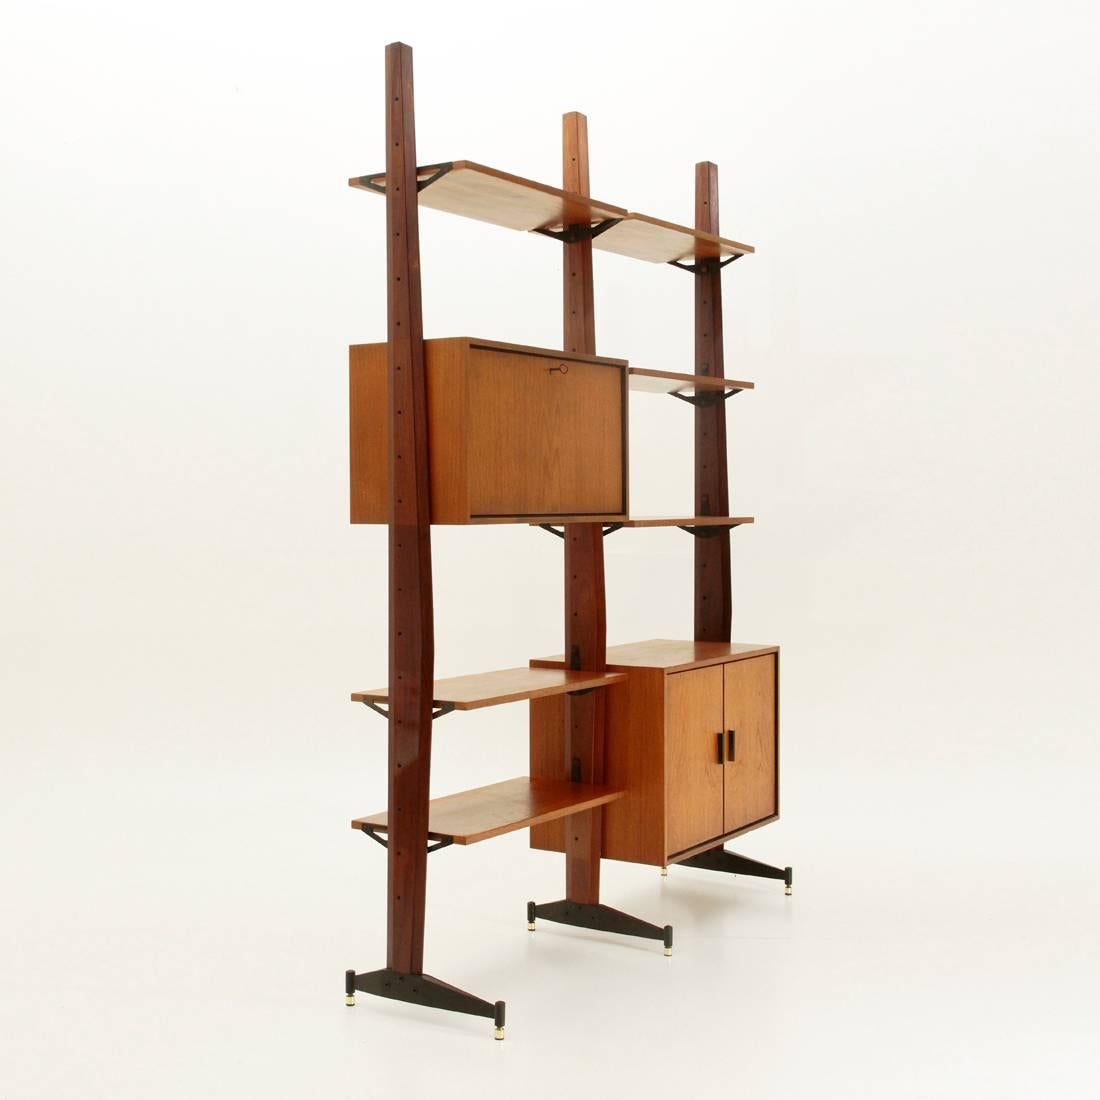 Italian teak bookcase from the 1960s.
Wooden faceted uprights,
foot in black painted metal and adjustable brass terminal.
Six shelves, one compartment with flap opening and one compartment with doors.
Good general conditions, some signs are